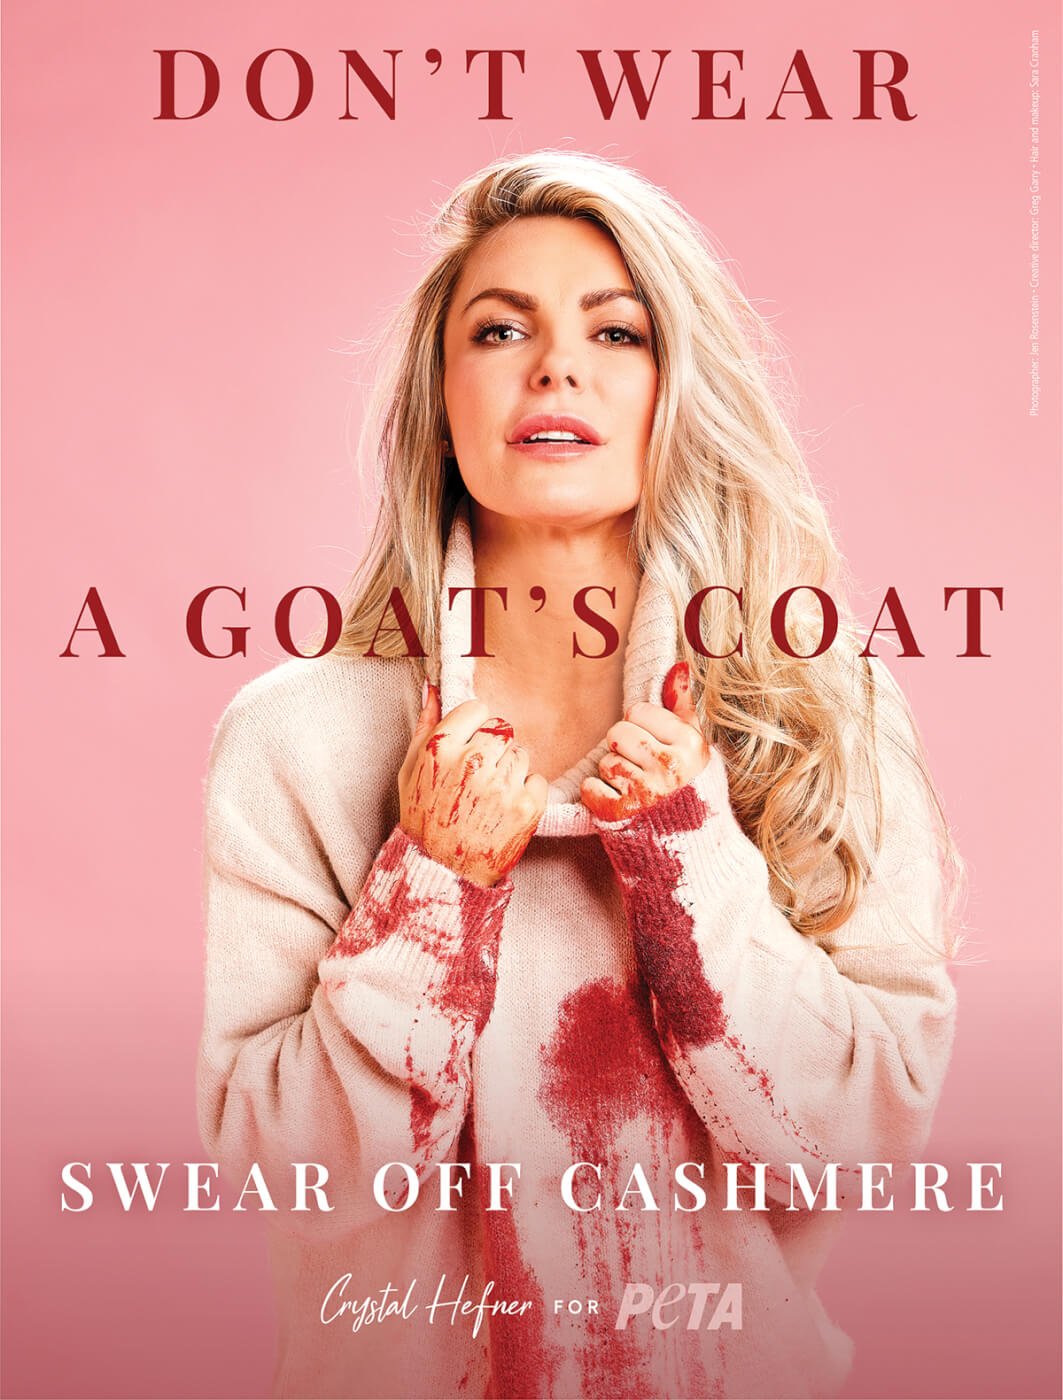 Crystal Hefner photographed against a pink background. She is wearing a white turtleneck splattered with blood and pulling down the neck. Text reads "Don't wear a goat's coat. Swear odd Cashmere"